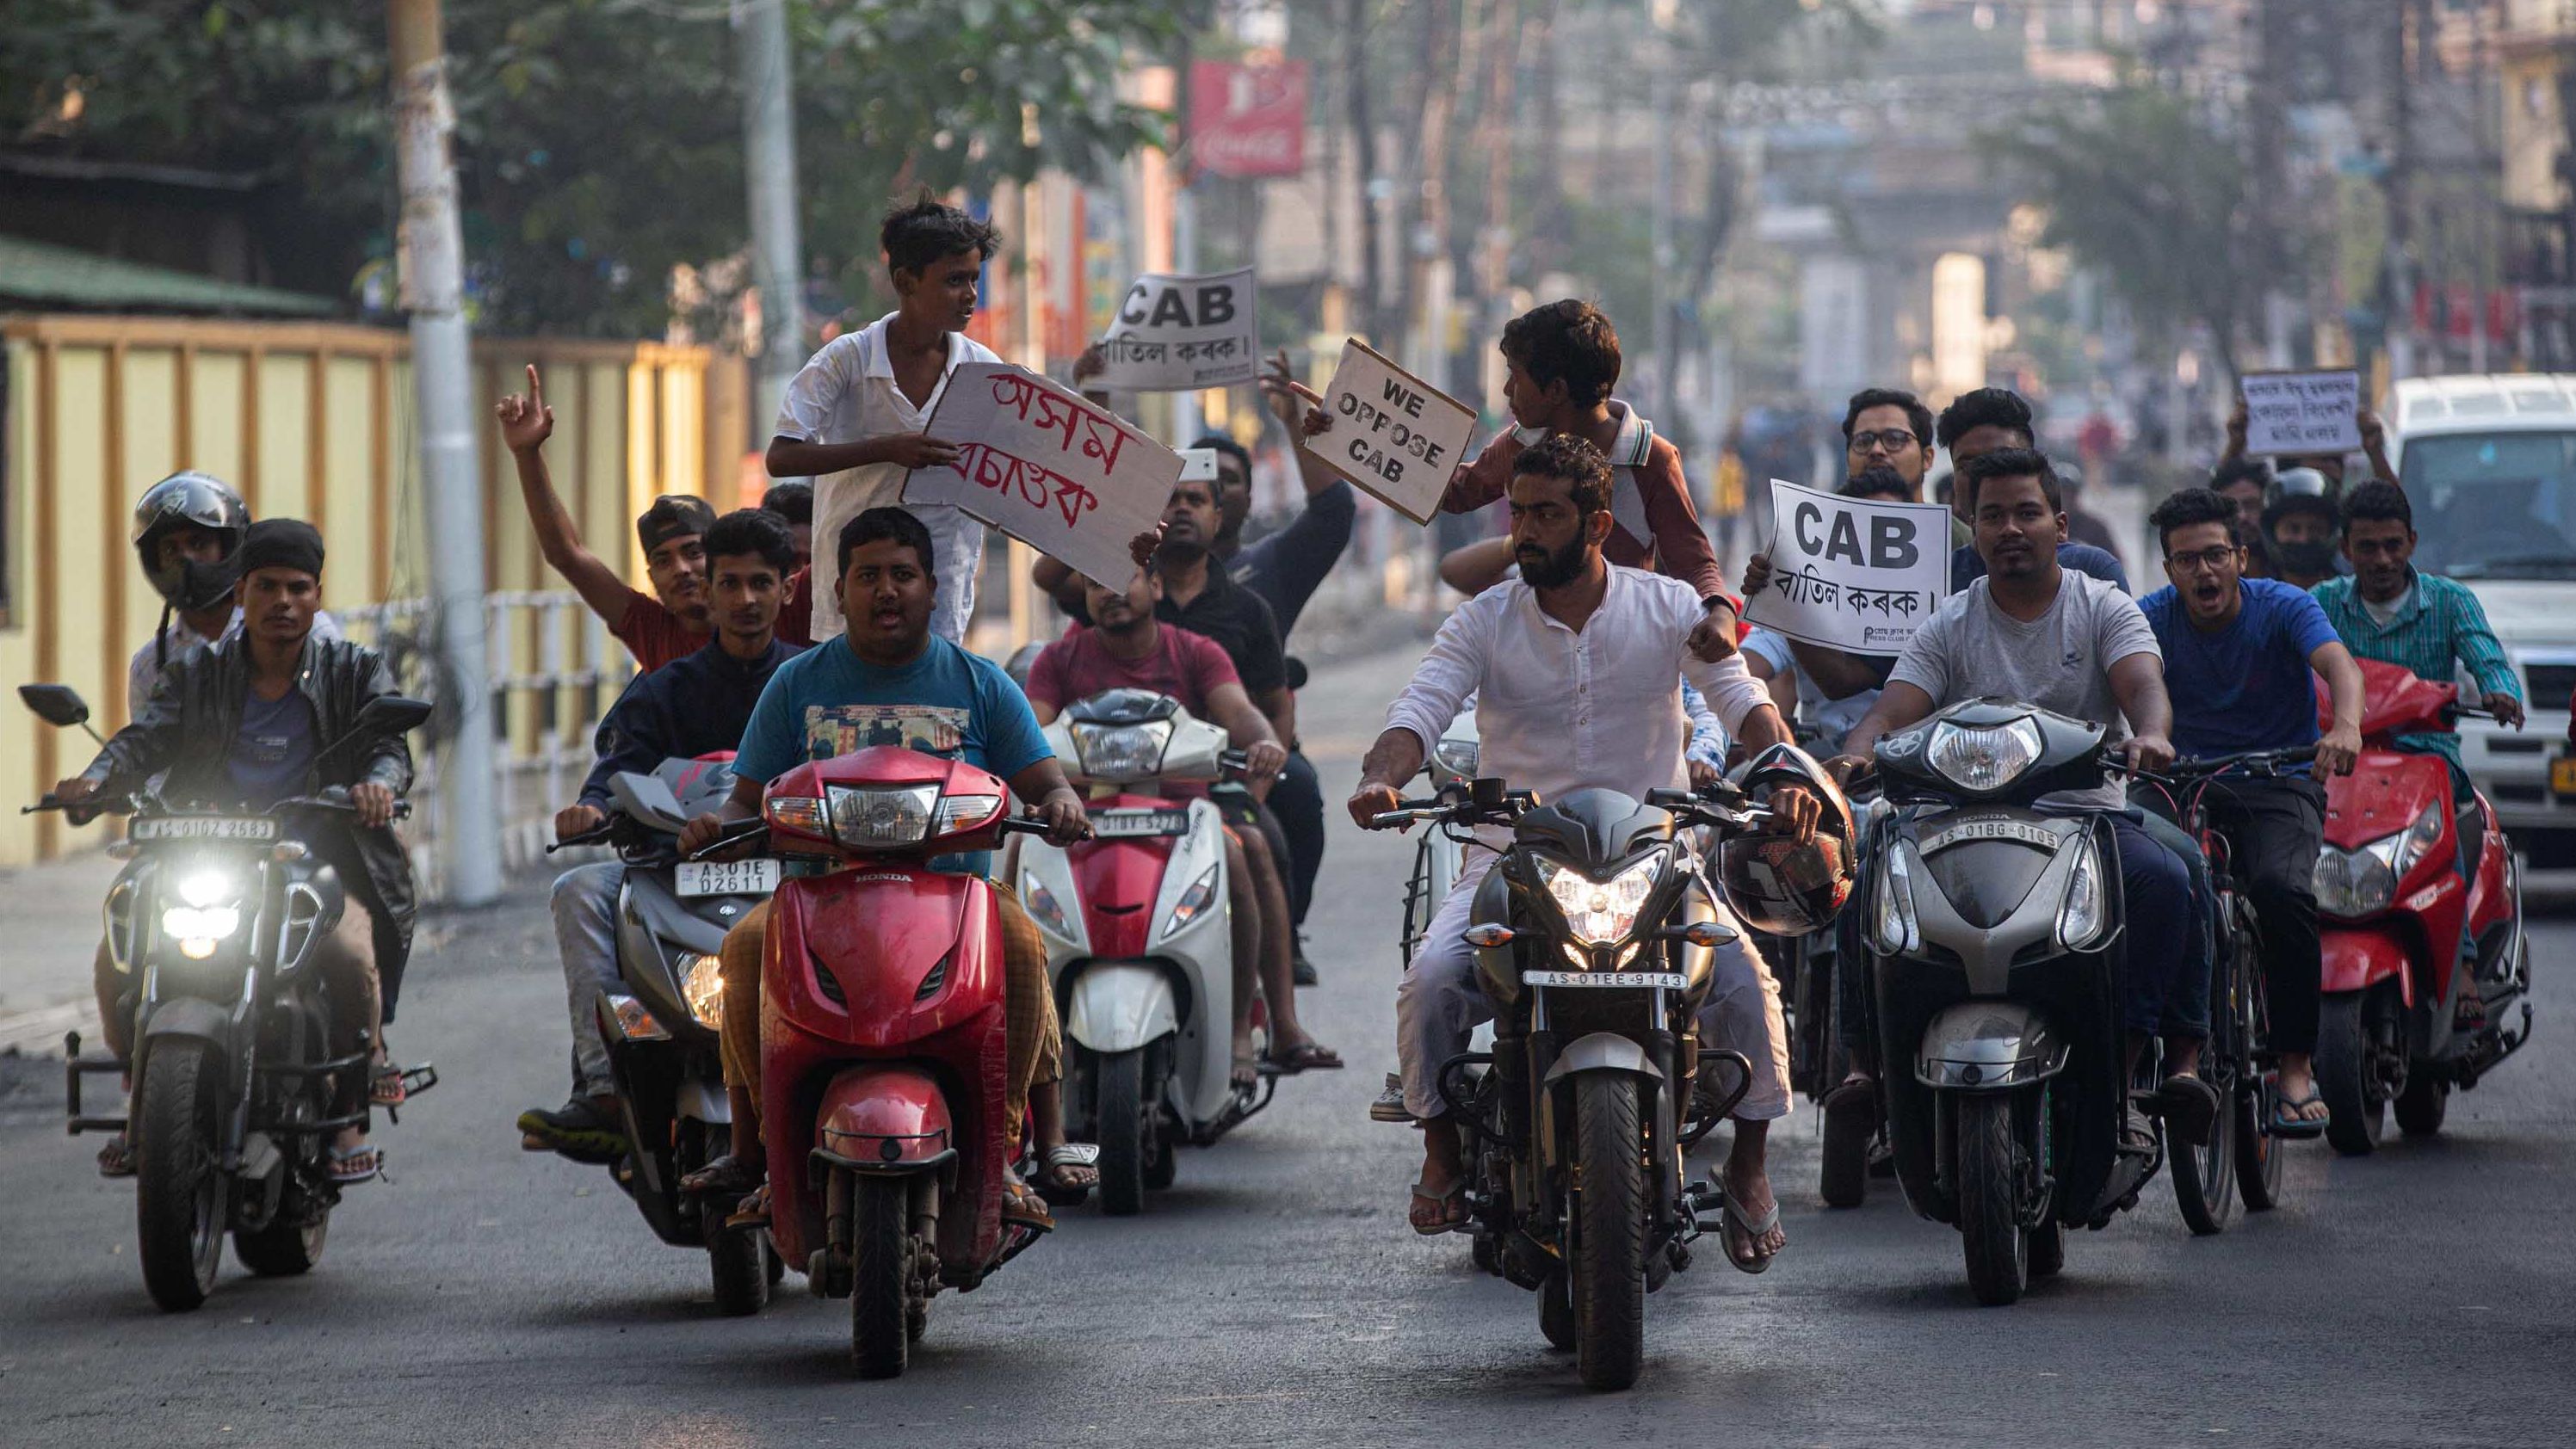 Protesters on motorbikes hold placards during a protest against the bill in Guwahati on Tuesday, December 10.